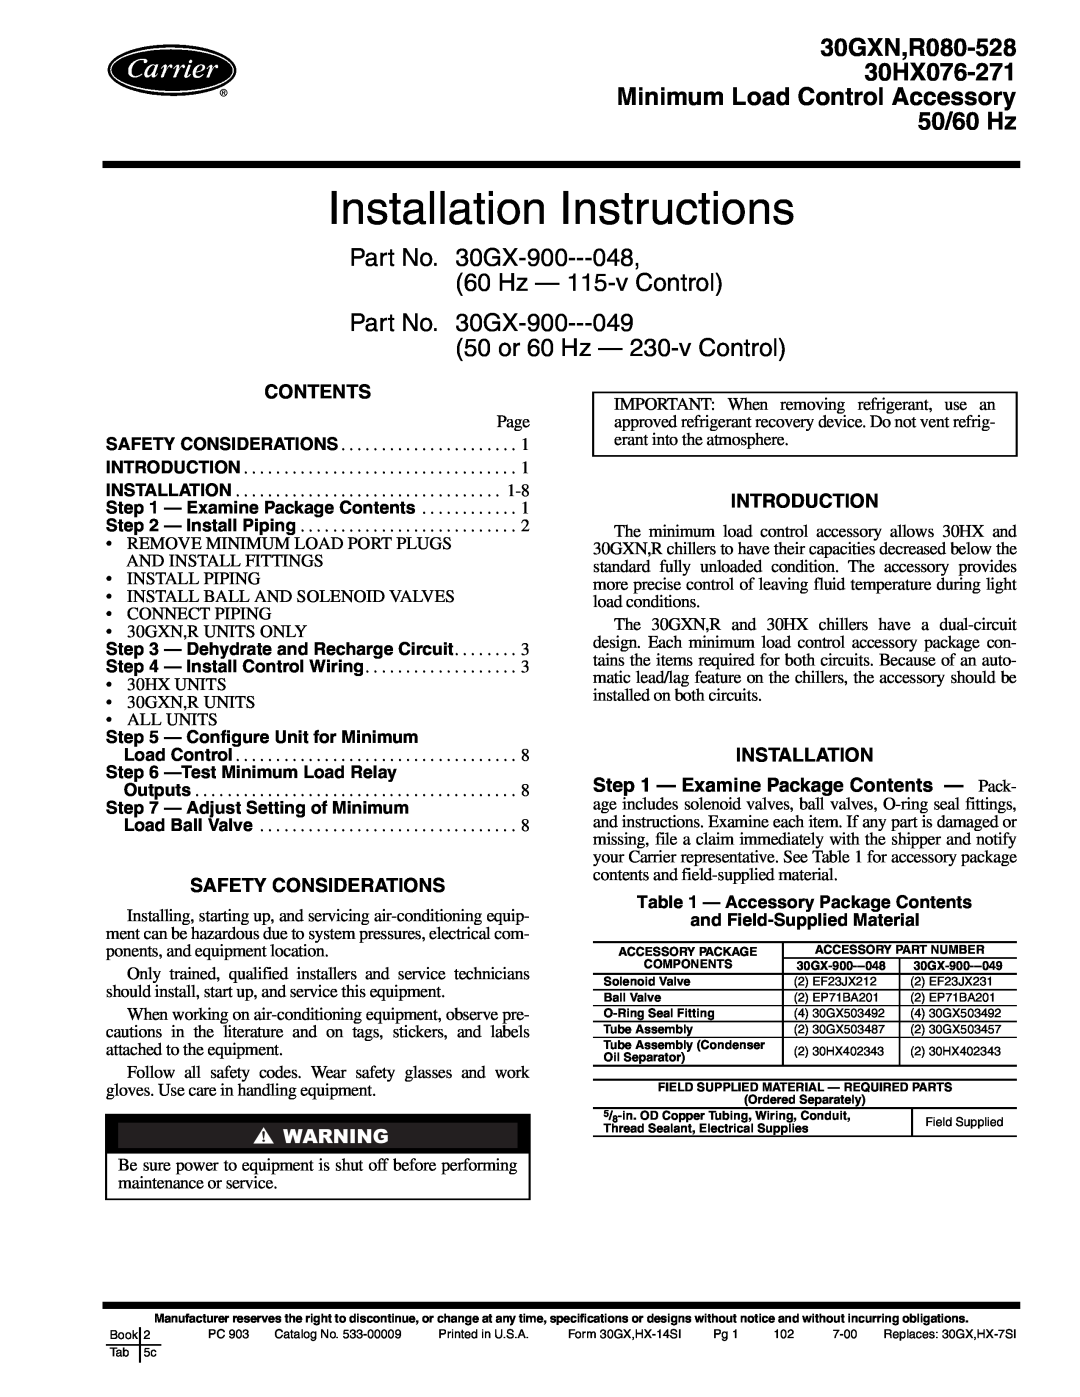 Carrier 30GXN installation instructions Installation Instructions, 50 or 60 Hz - 230-v Control, Examine Package Contents 